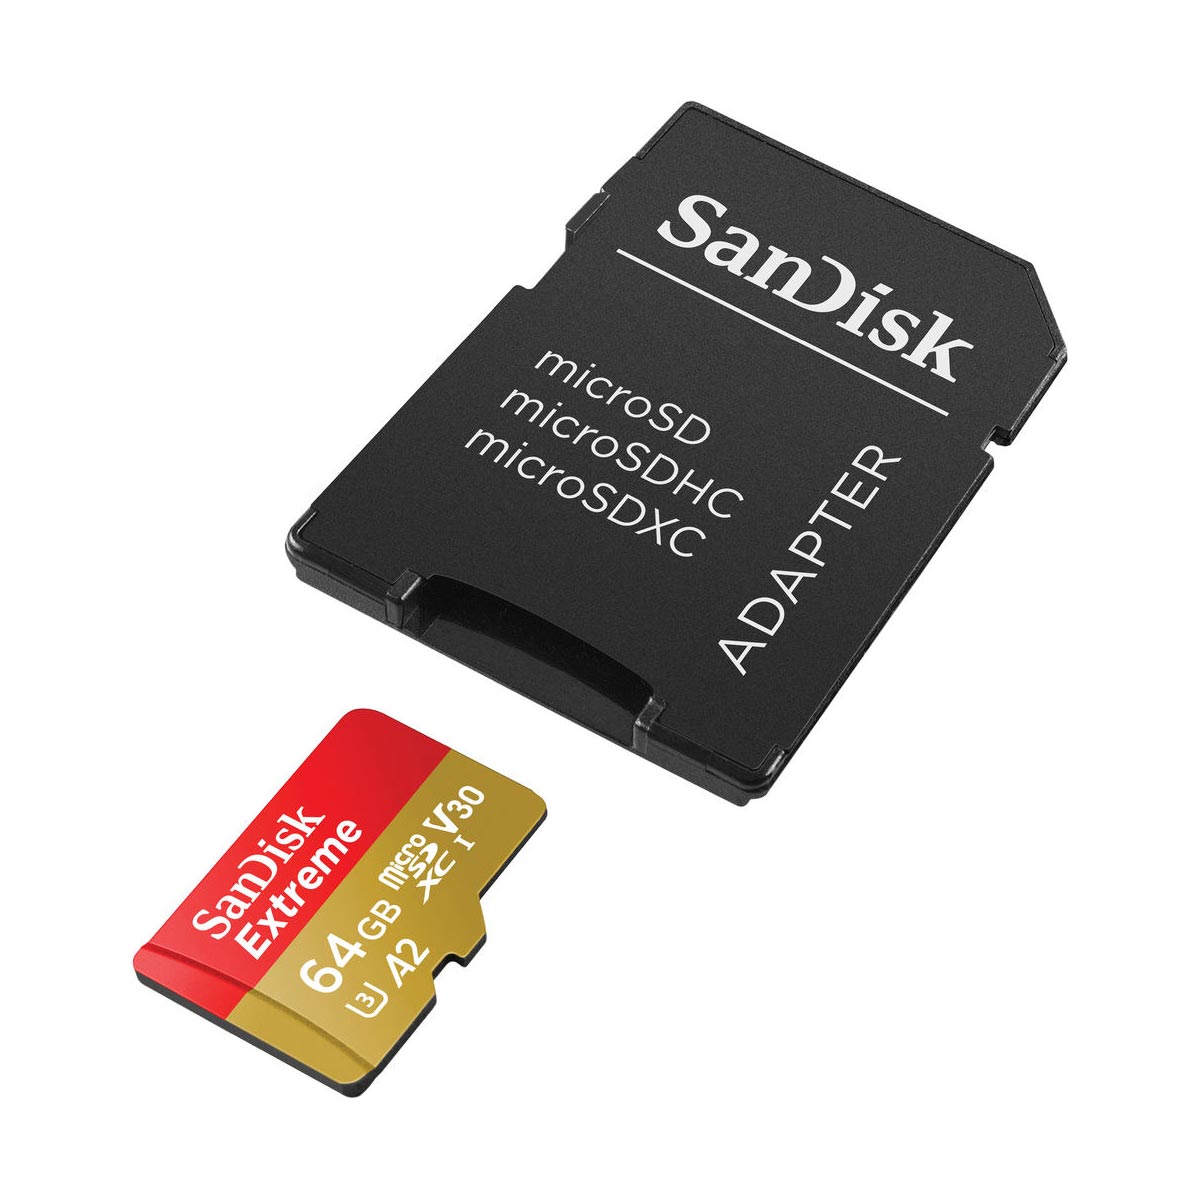 SanDisk 64GB Extreme UHS-I microSDXC (V30) 170mb/s Memory Card with SD Adapter